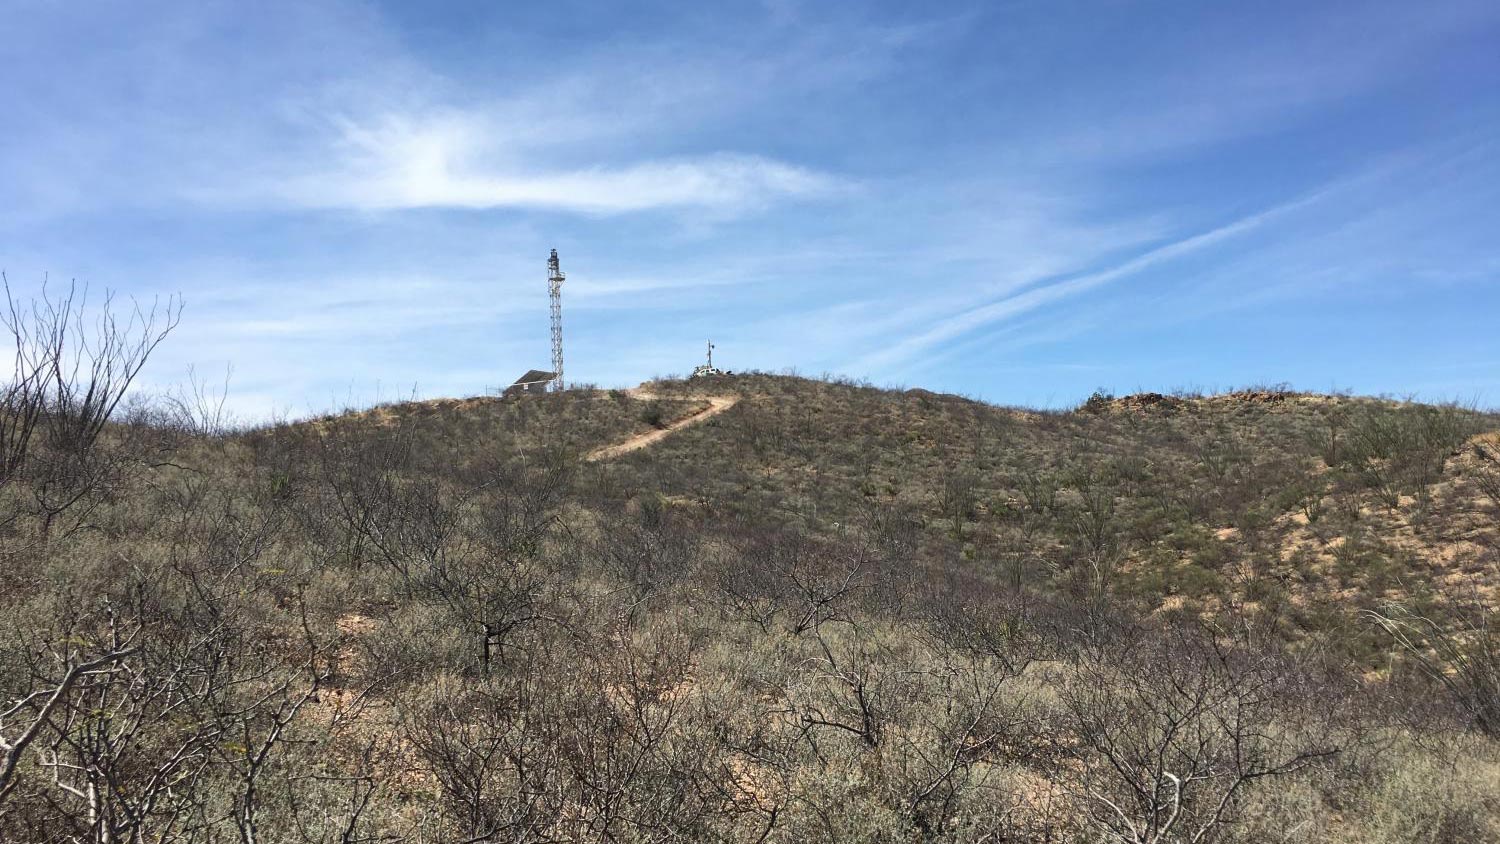 One of the U.S. Border Patrol's integrated fixed towers built on a hill in Cochise County.